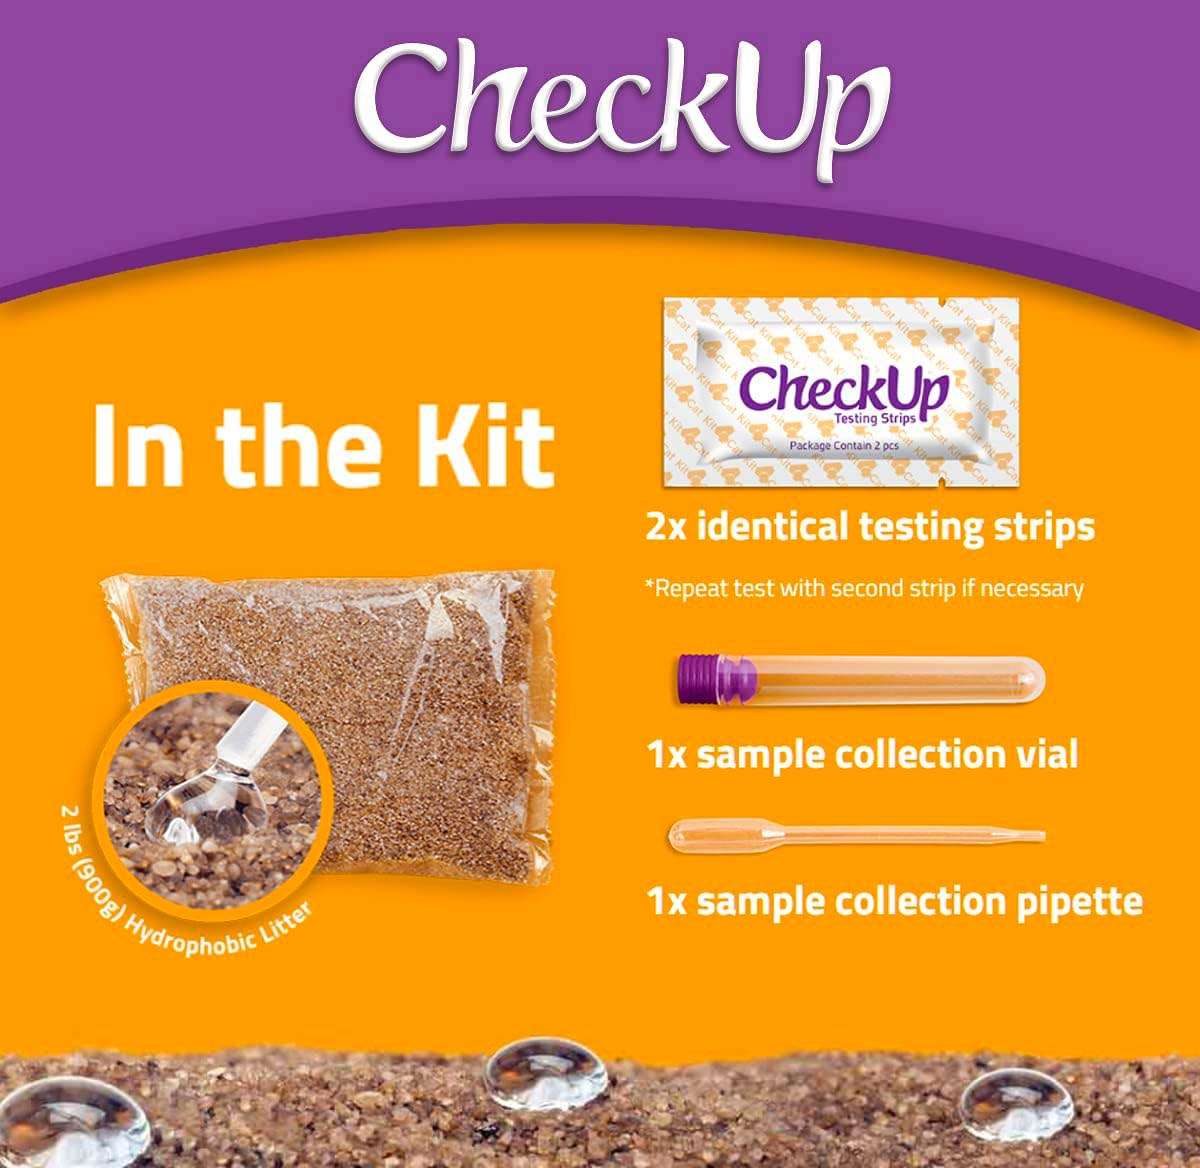 Urine Collection & Test Strips